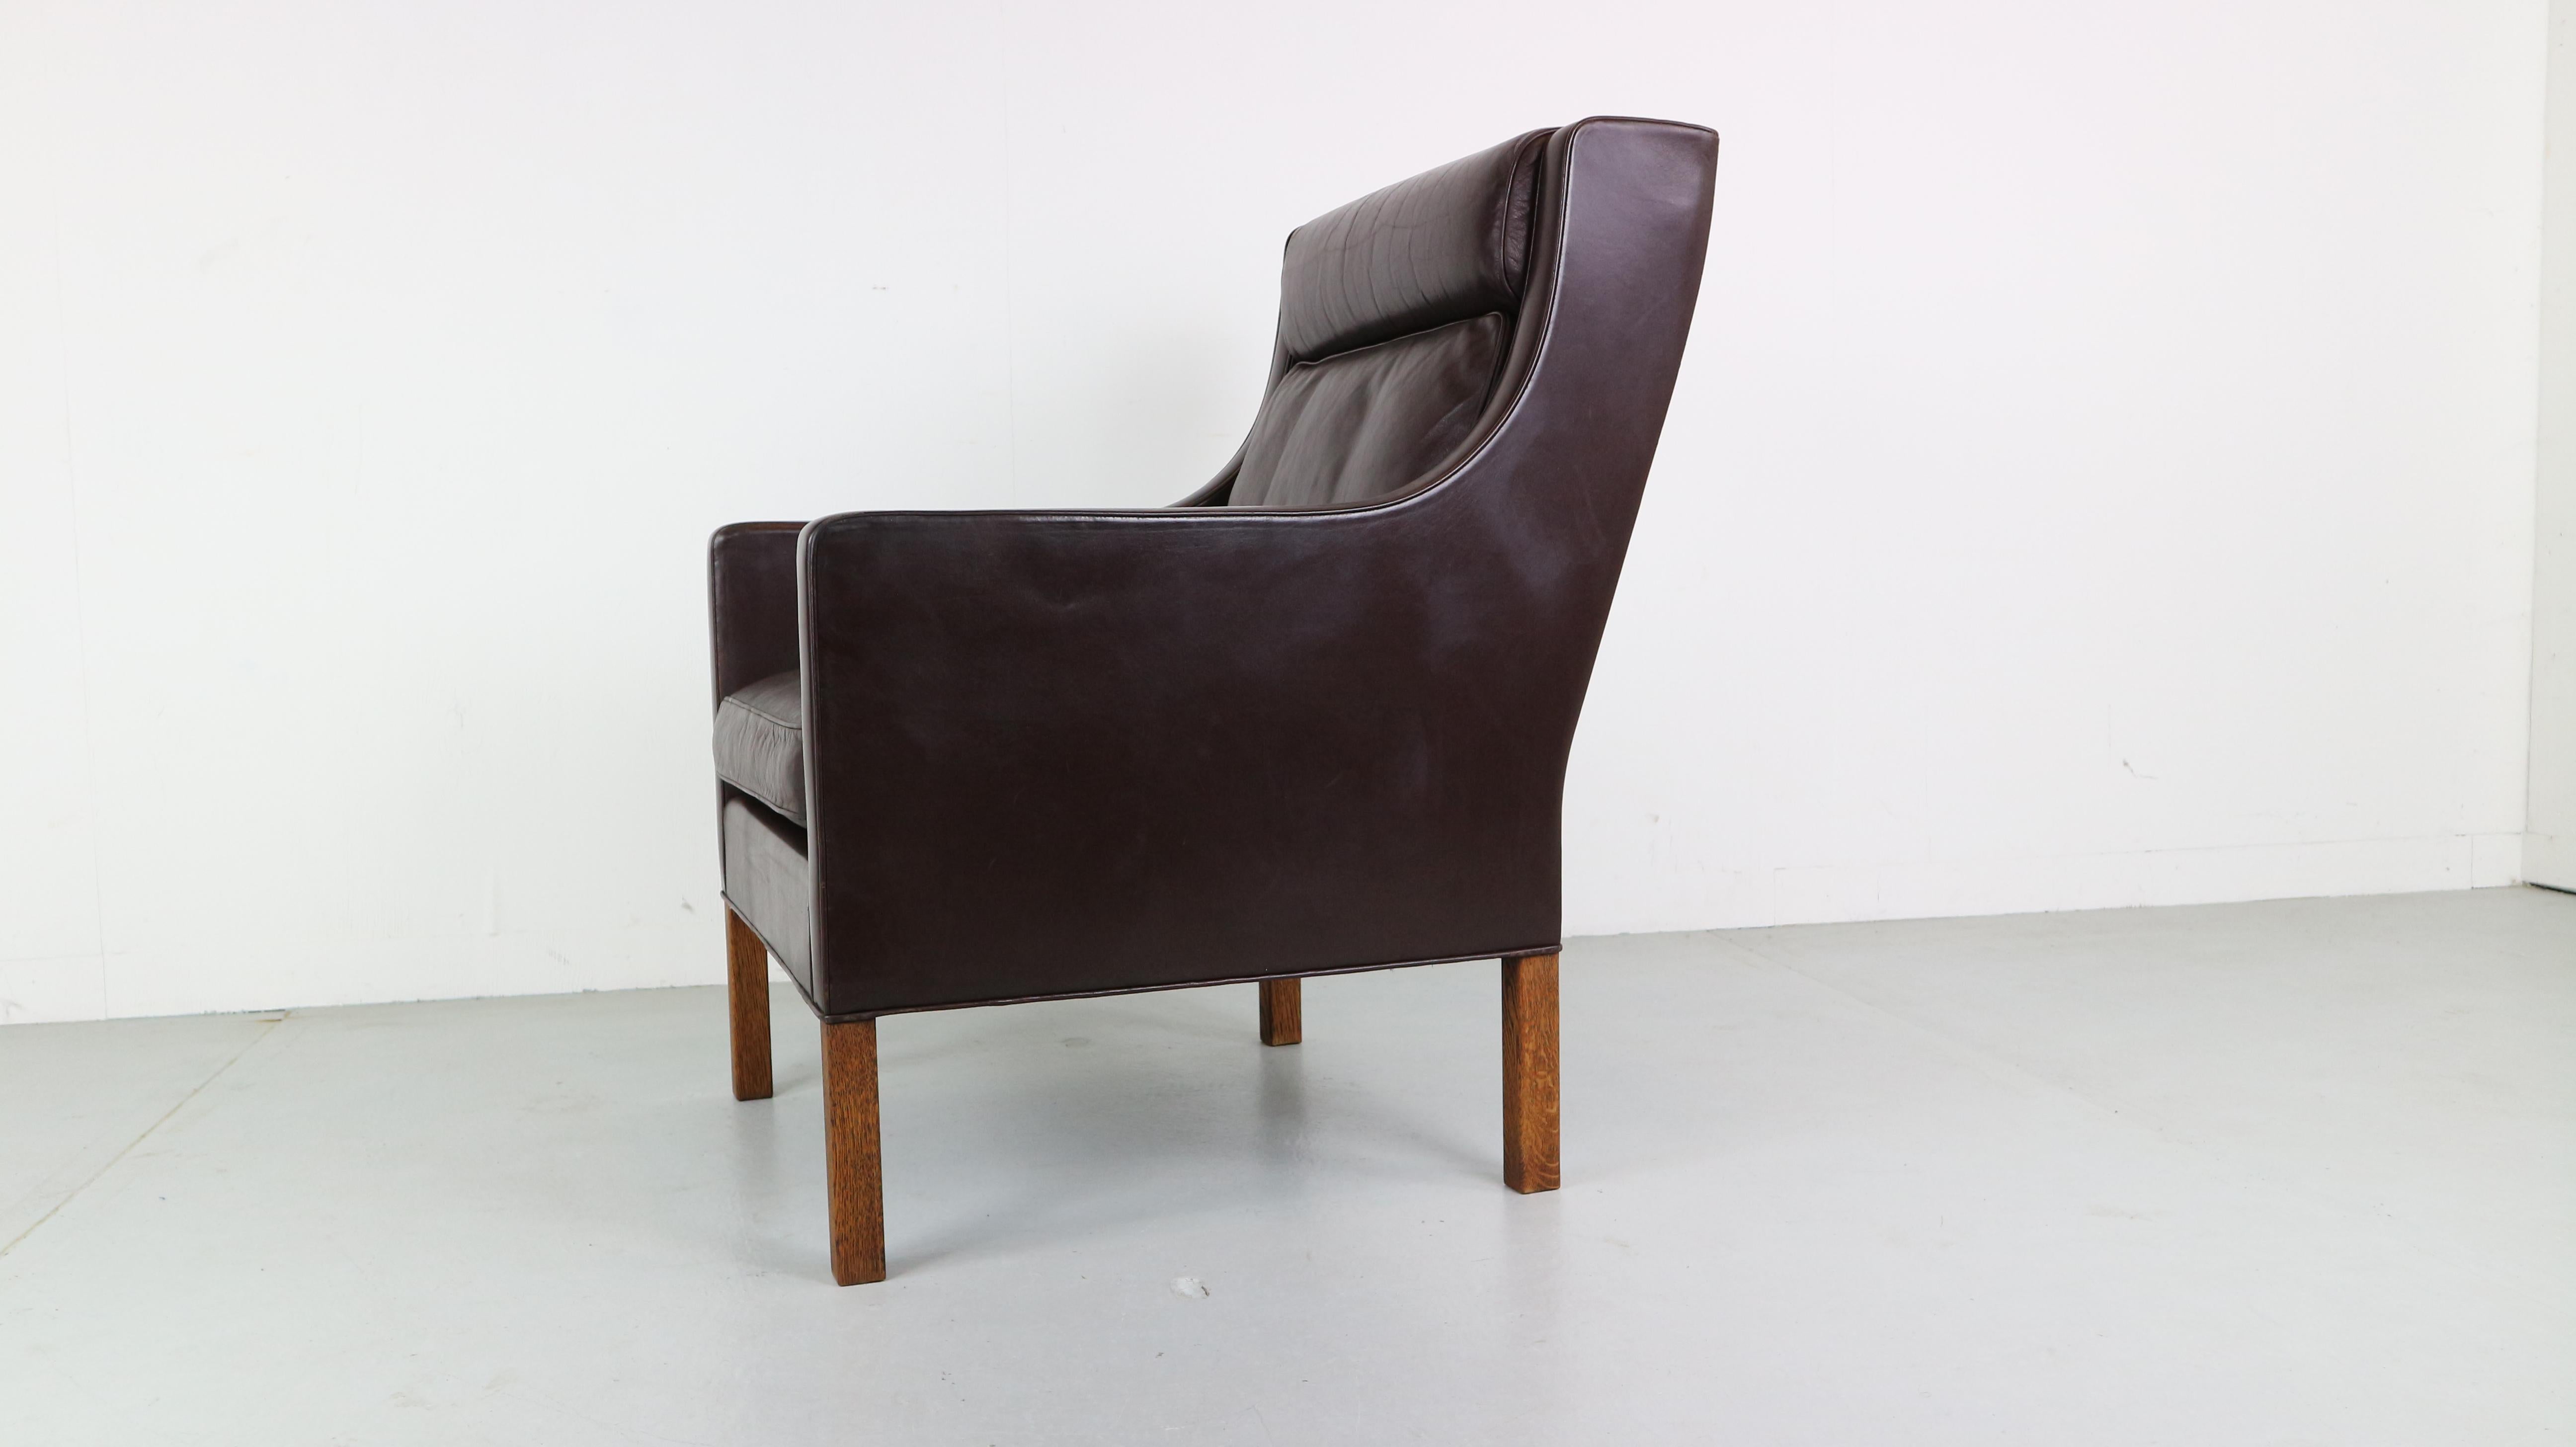 This model 2431 high lounge chair with deep-brown leather and solid oak legs was designed by Børge Mogensen in the 1960s. This lounge chair was made in the 1970s by Fredericia Furniture in Denmark and is very comfortable, with the cushions remaining